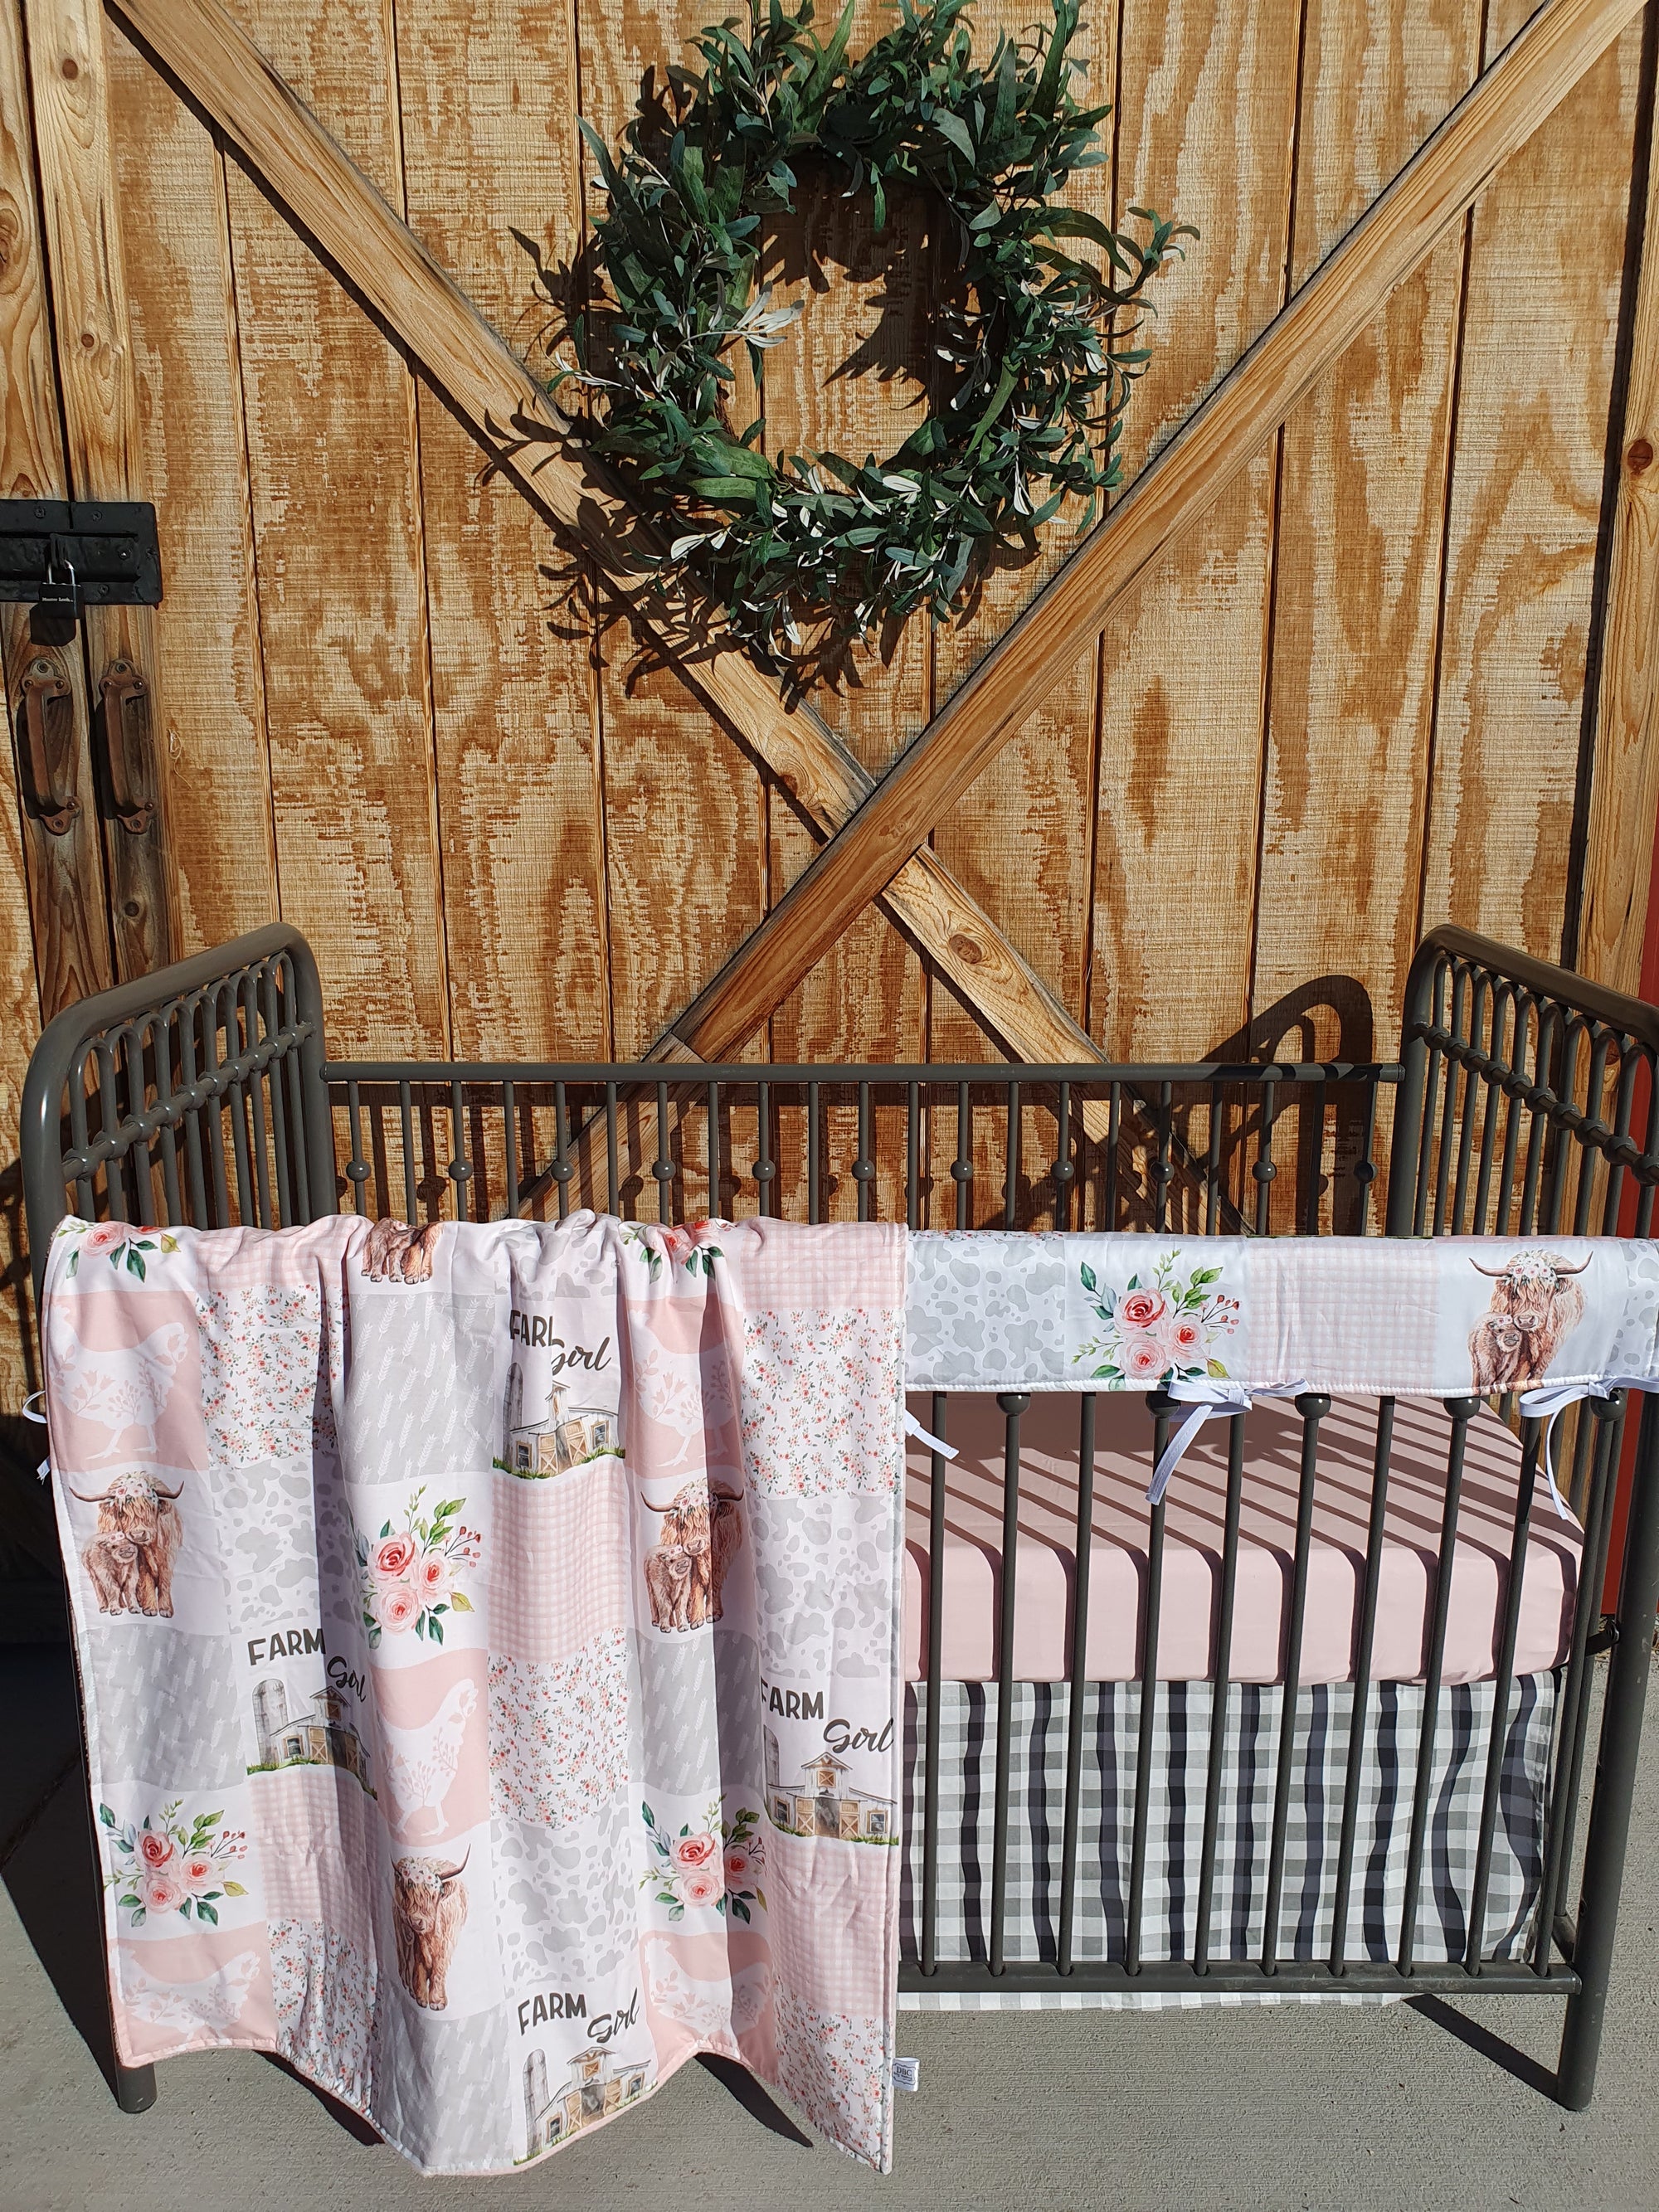 New Release Girl Crib Bedding - Highland Cow Farm Girl in Pink Gray Baby Bedding & Nursery Collection - DBC Baby Bedding Co 